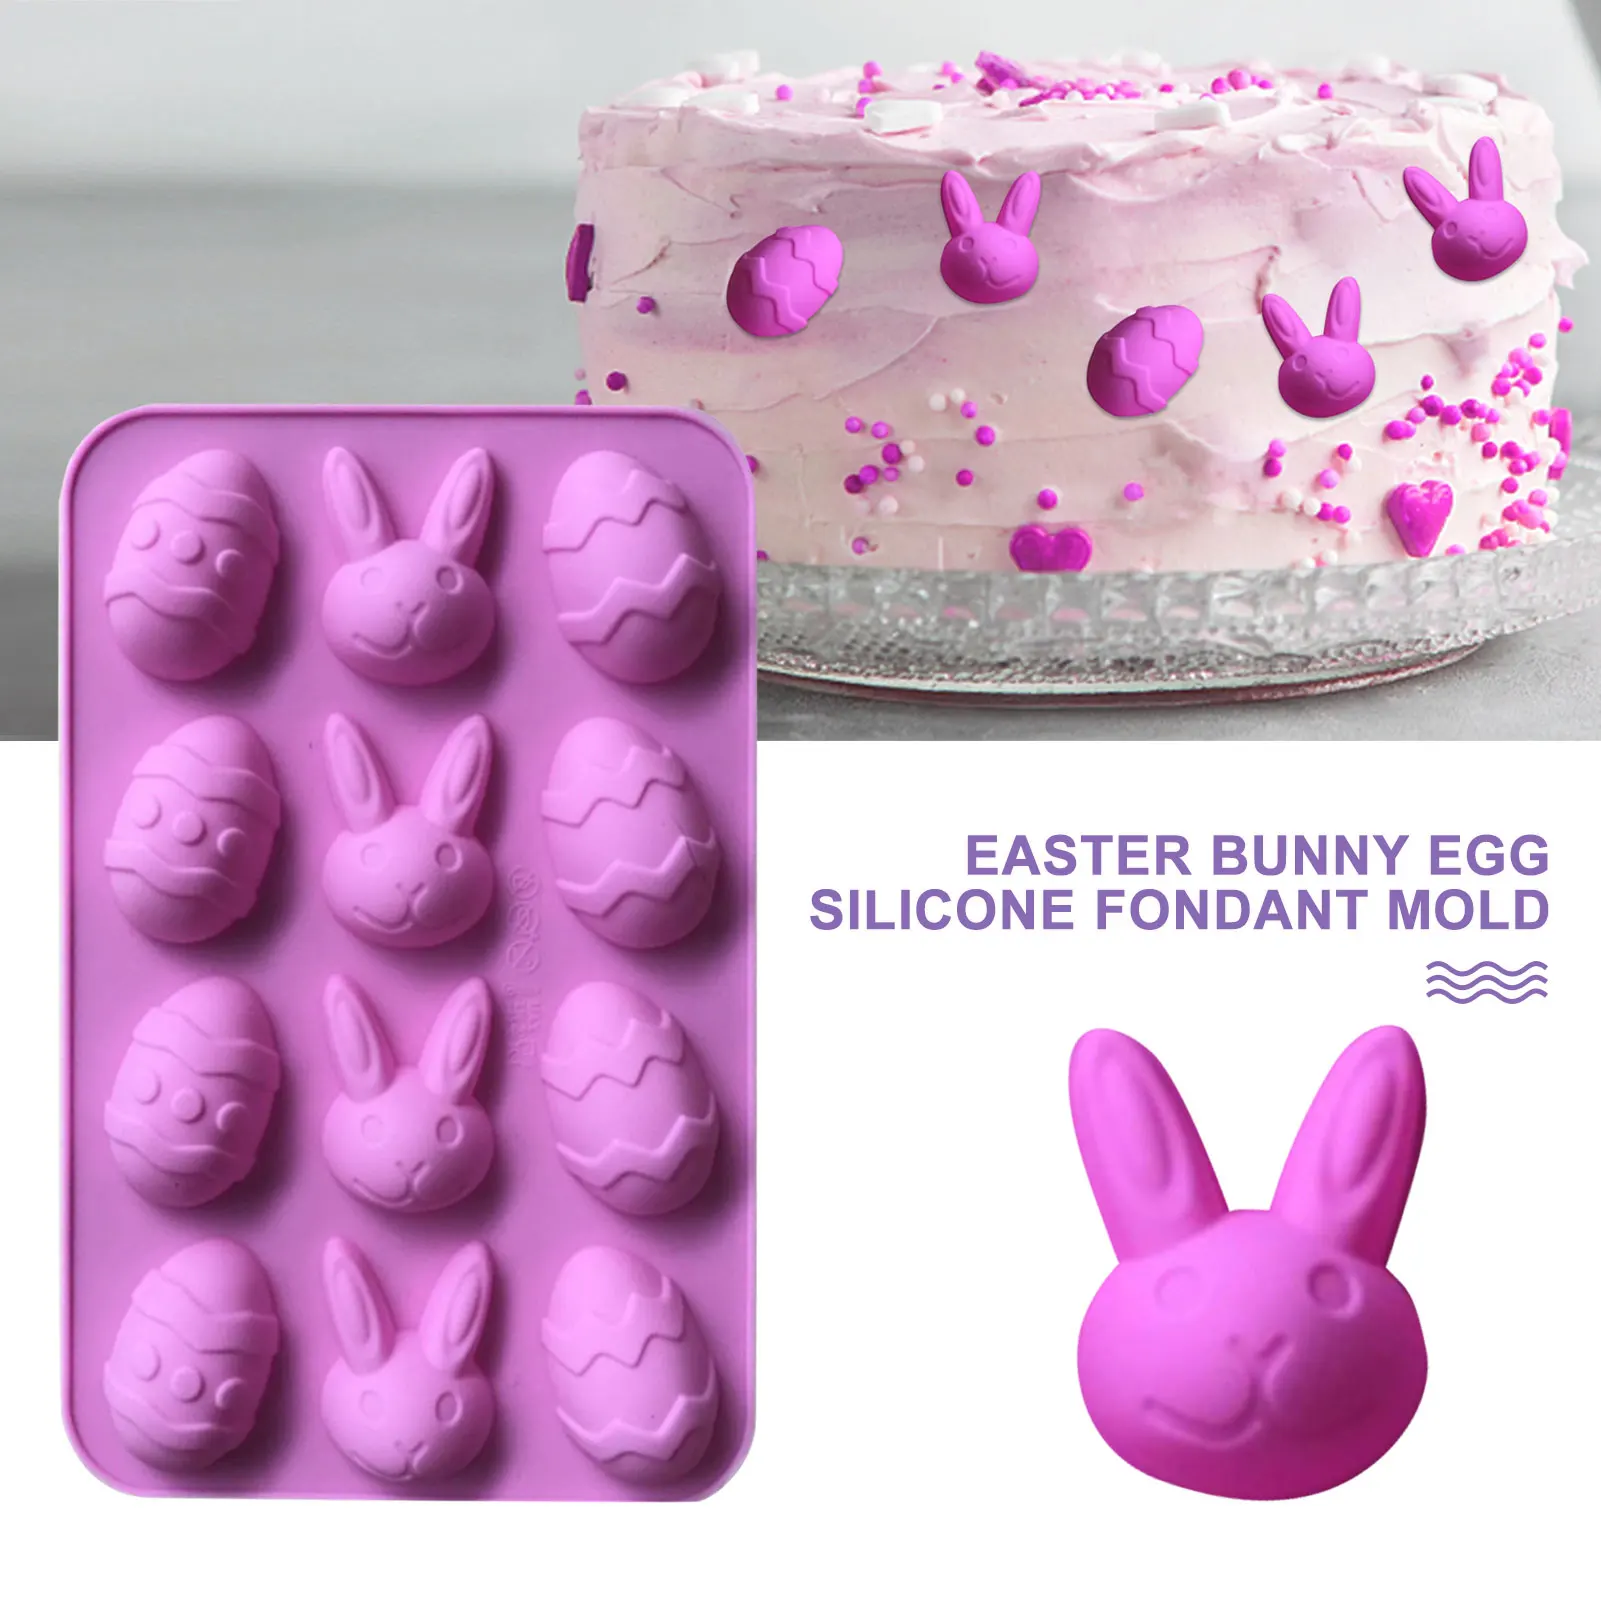 

Easter Bunny Egg Silicone Fondant Mold Chocolate Ice Mould Tray food-grade organic silicon Easy to Clean Nonstick and Exquisite